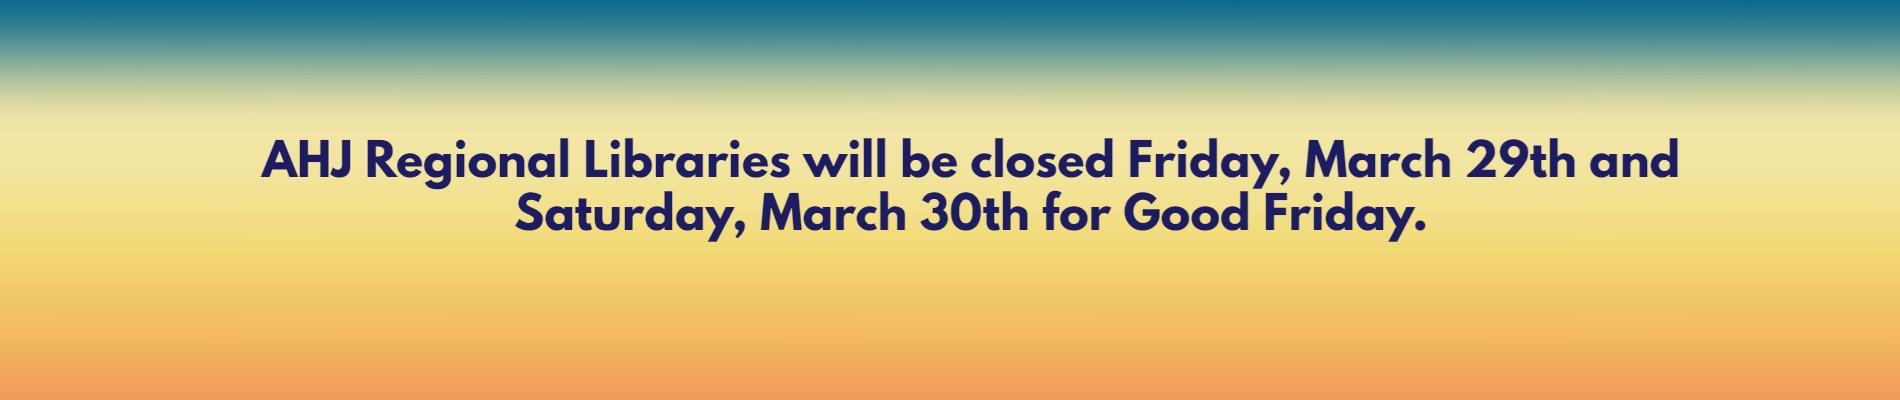 AHJ Regional Libraries will be closed Friday, March 29th and Saturday, March 30th for Good Friday.